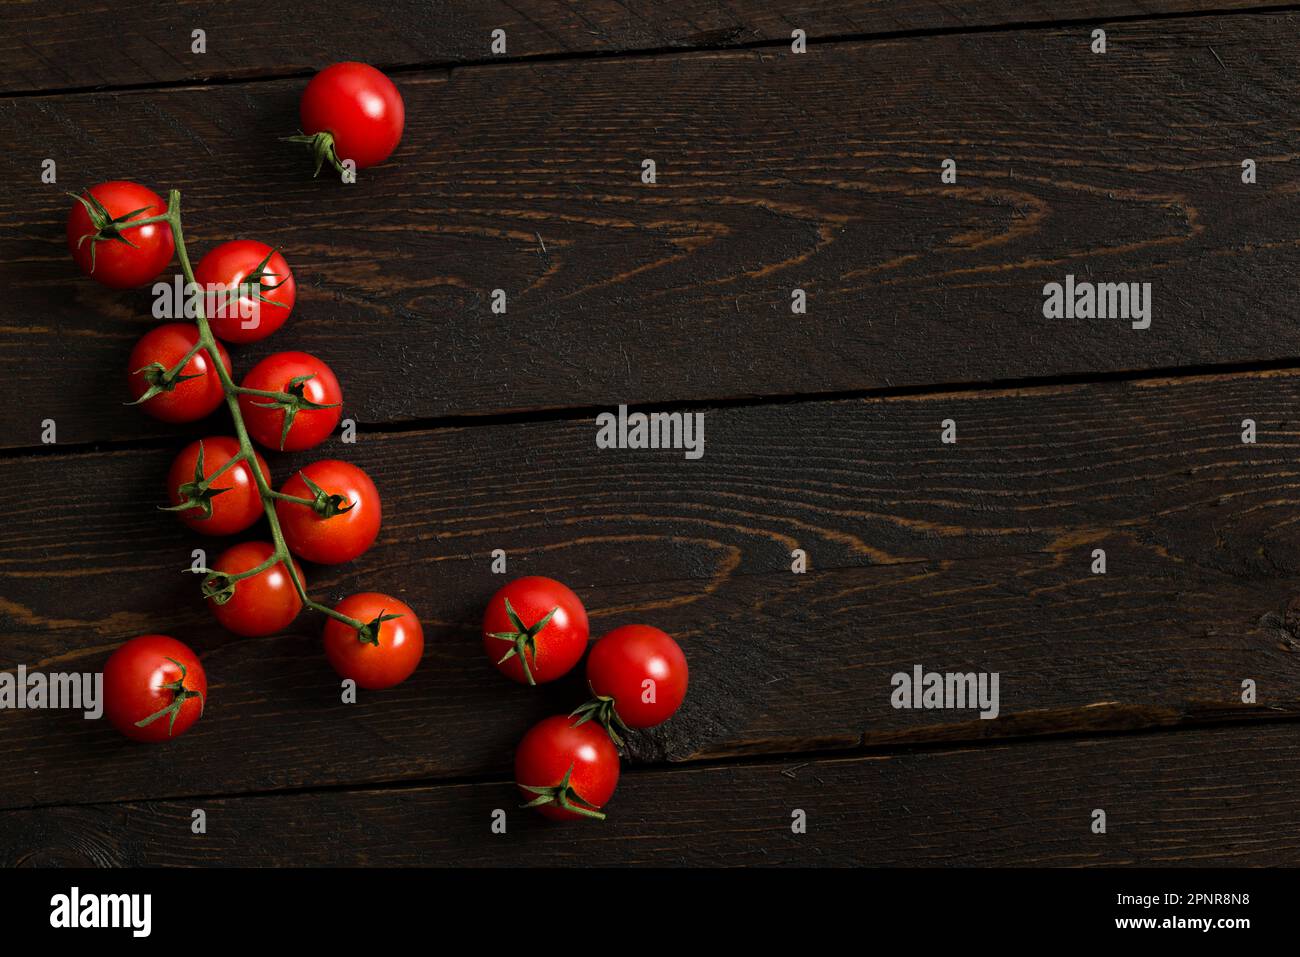 Small red cherry tomatoes on wooden table. Stock Photo